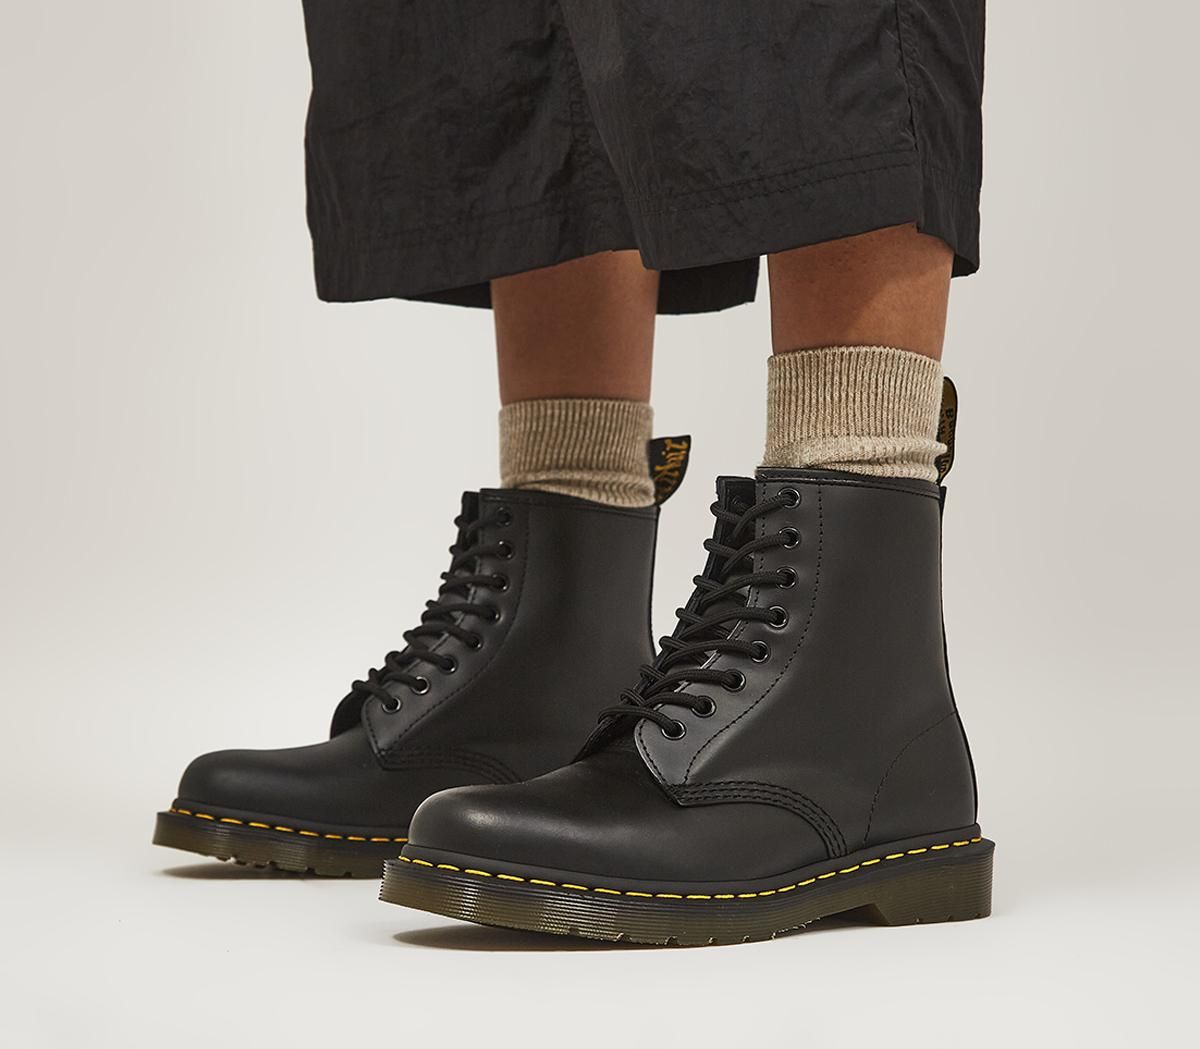 Dr. Martens 8 Eyelet Lace Up Boots Black - Ankle Boots | OFFICE London (UK)